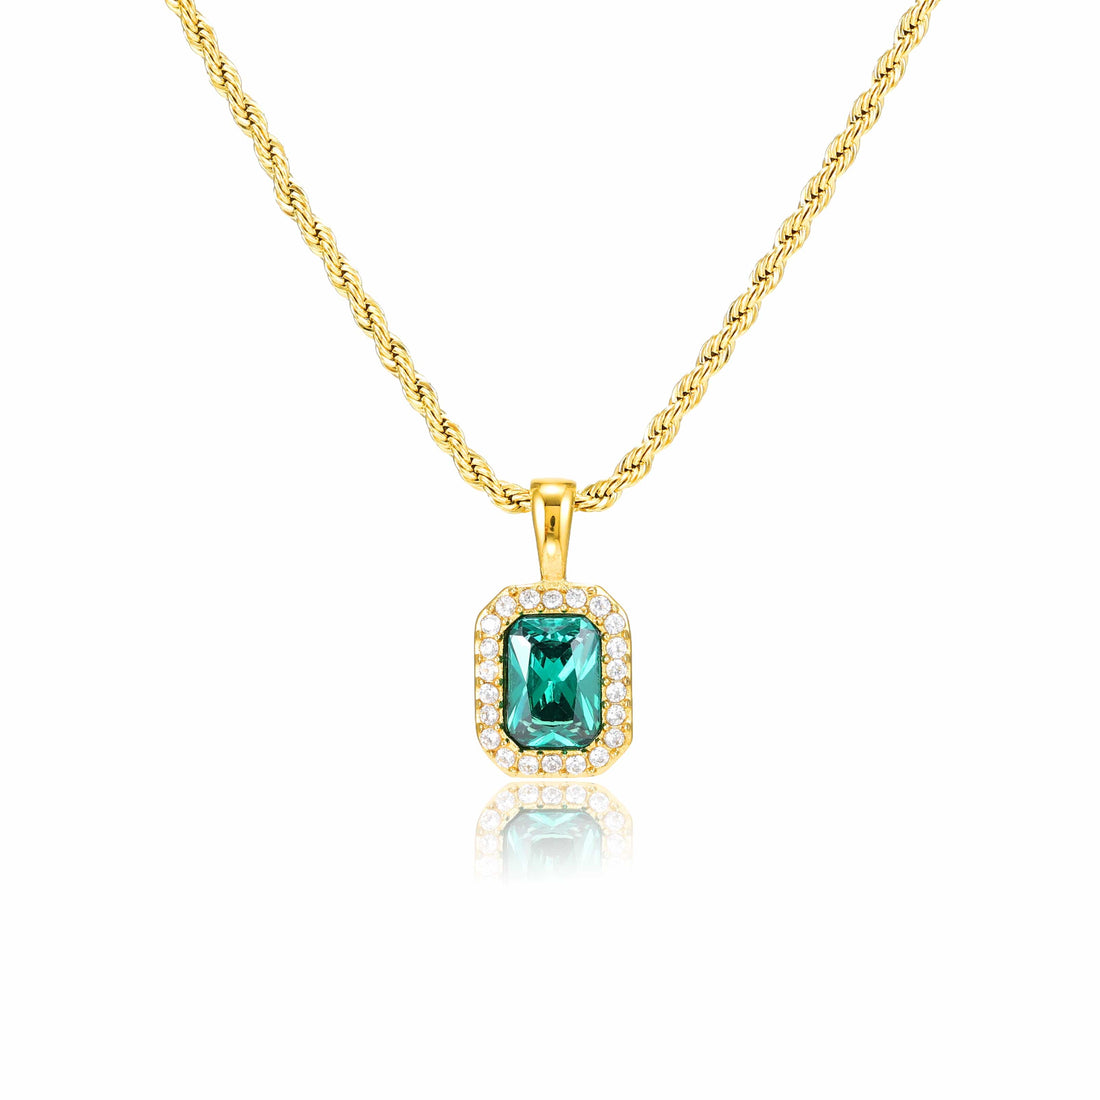 bianco rosso Necklaces Gold Emerald Charm Necklace cyprus greece jewelry gift free shipping europe worldwide